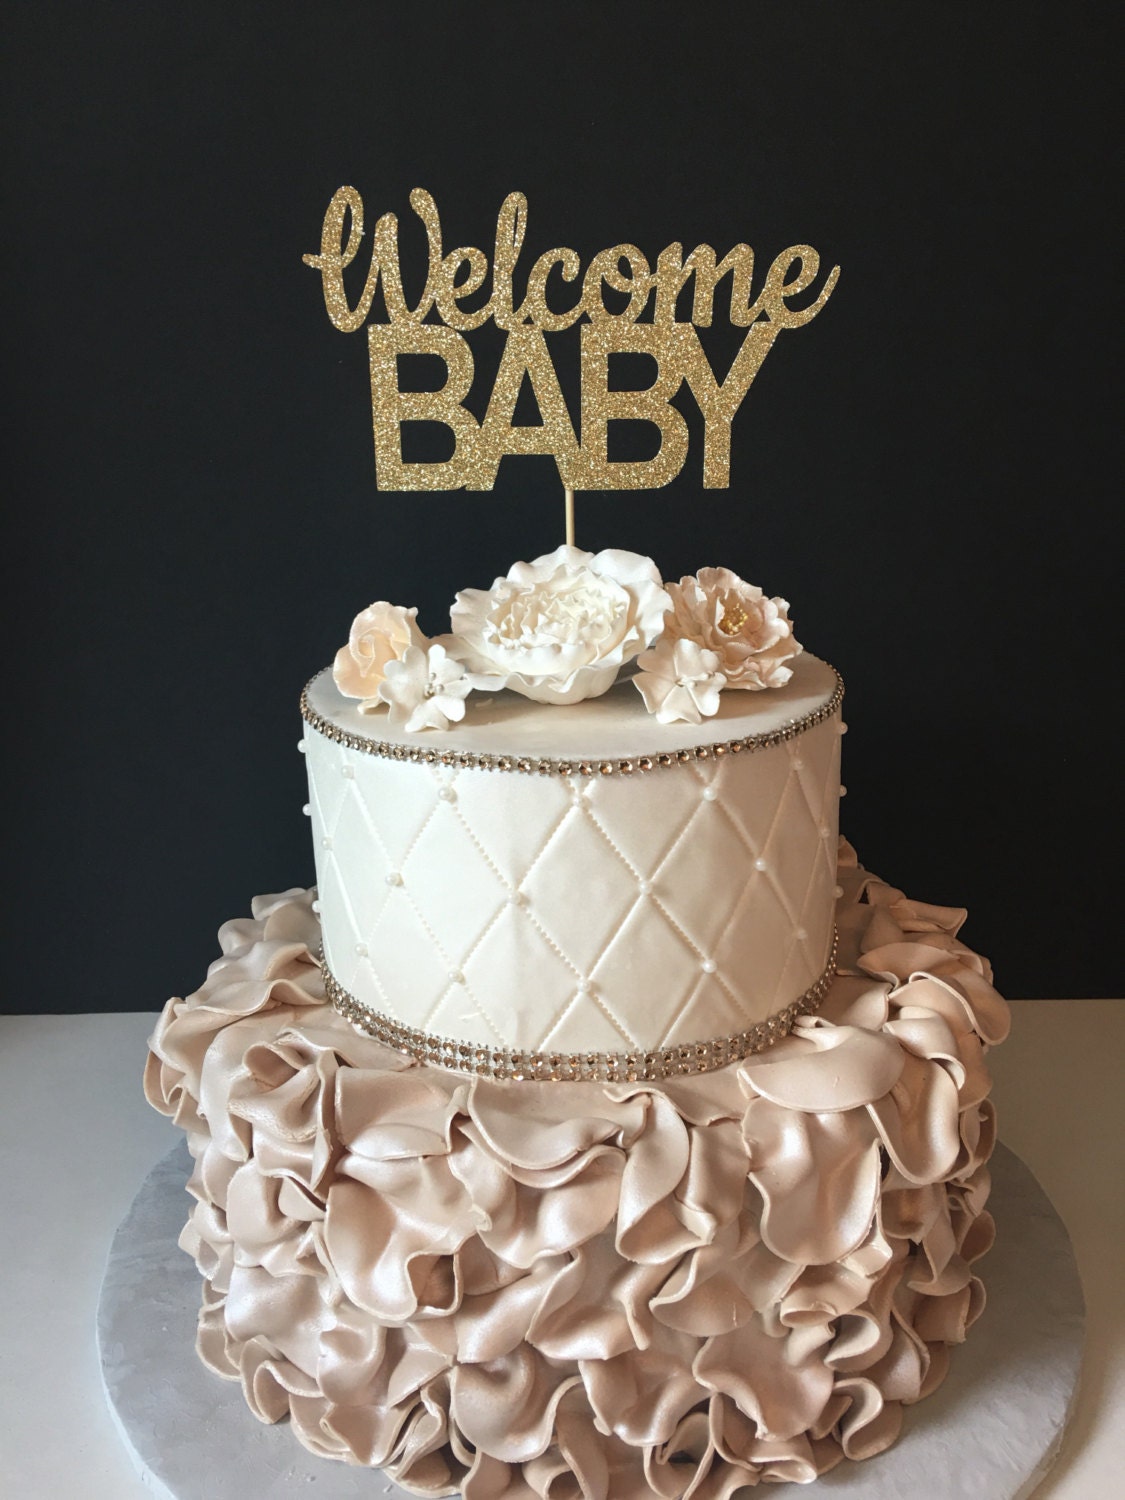 Welcome Baby Cake Topper Baby Shower Cake Topper Gold